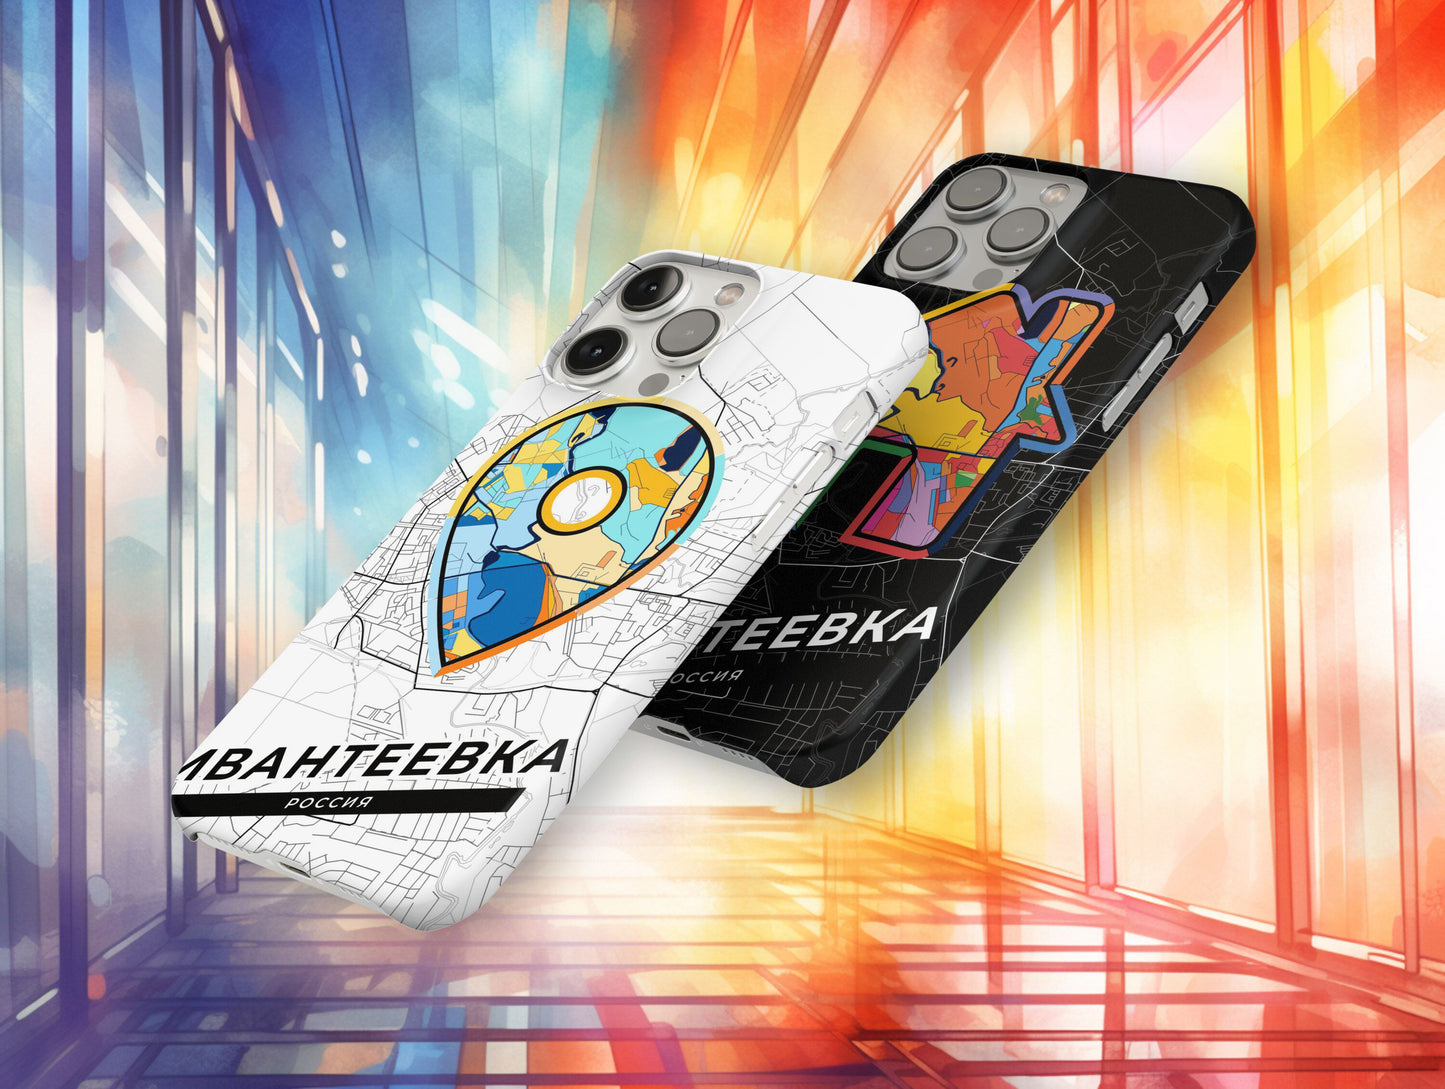 Ivanteyevka Russia slim phone case with colorful icon. Birthday, wedding or housewarming gift. Couple match cases.